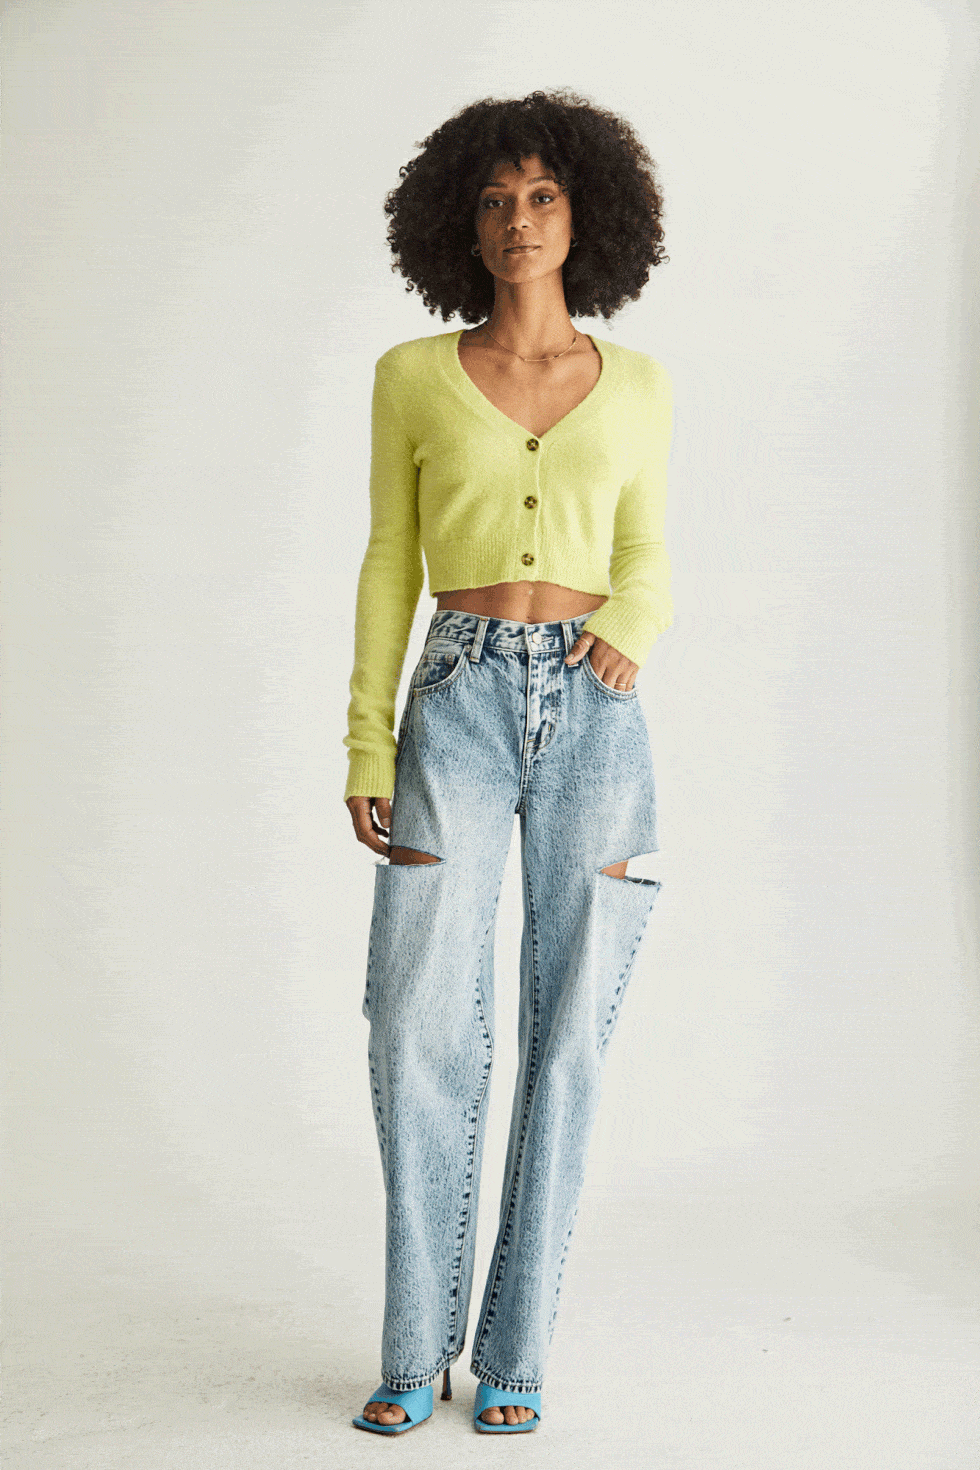 Outfit inspo for a city break  Tube top and jeans, Tube top outfits, Jeans  and sneakers outfit